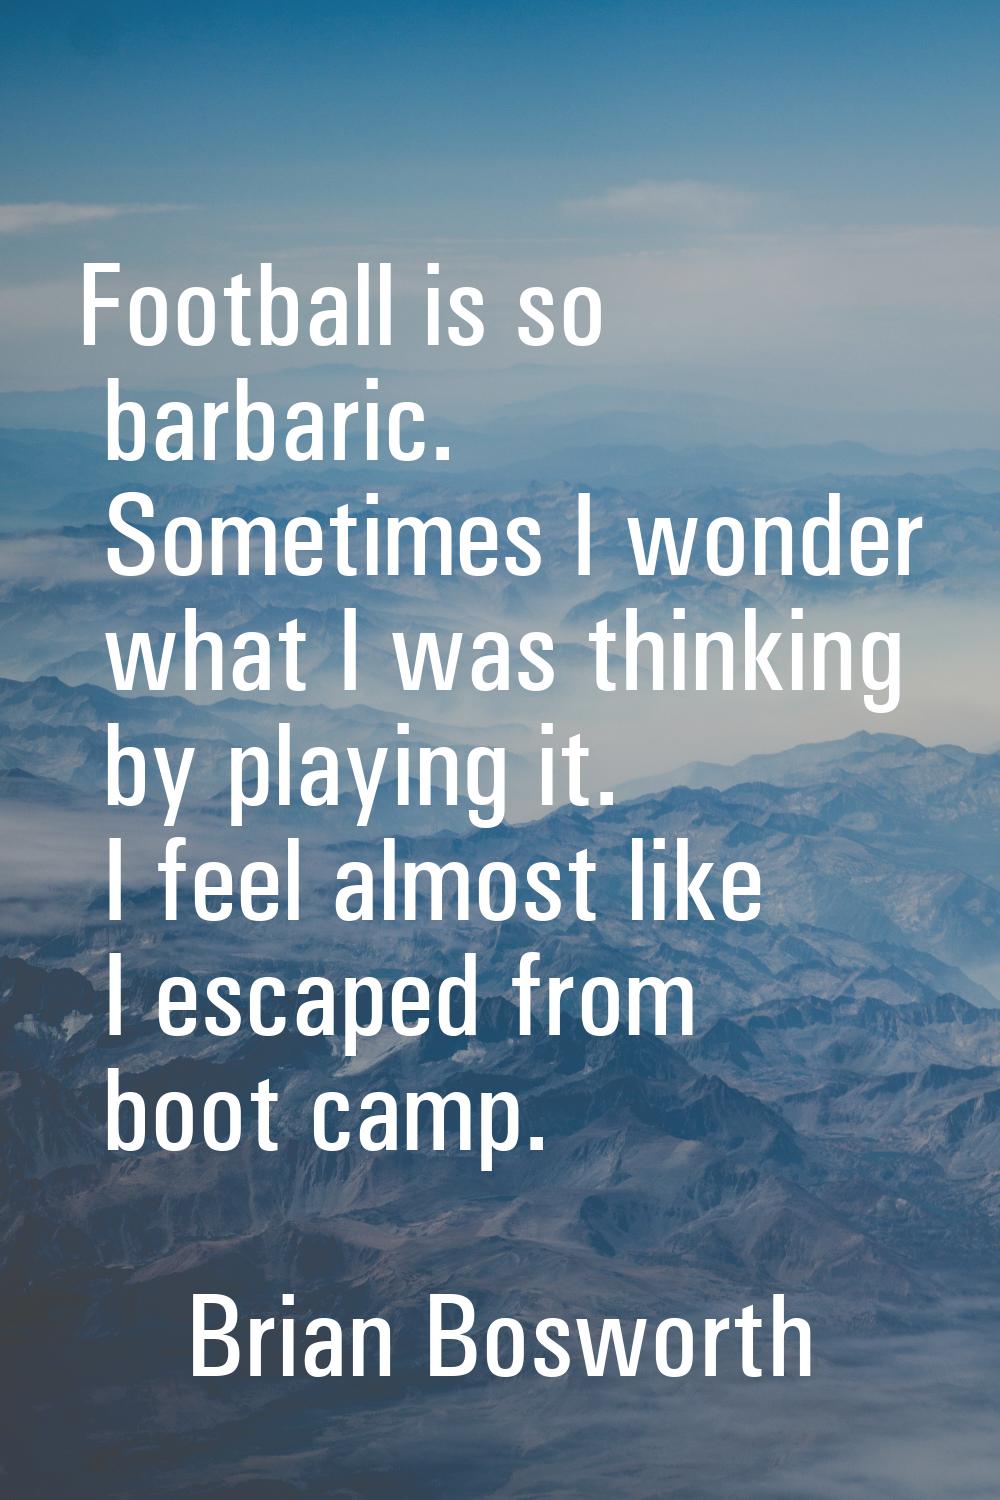 Football is so barbaric. Sometimes I wonder what I was thinking by playing it. I feel almost like I